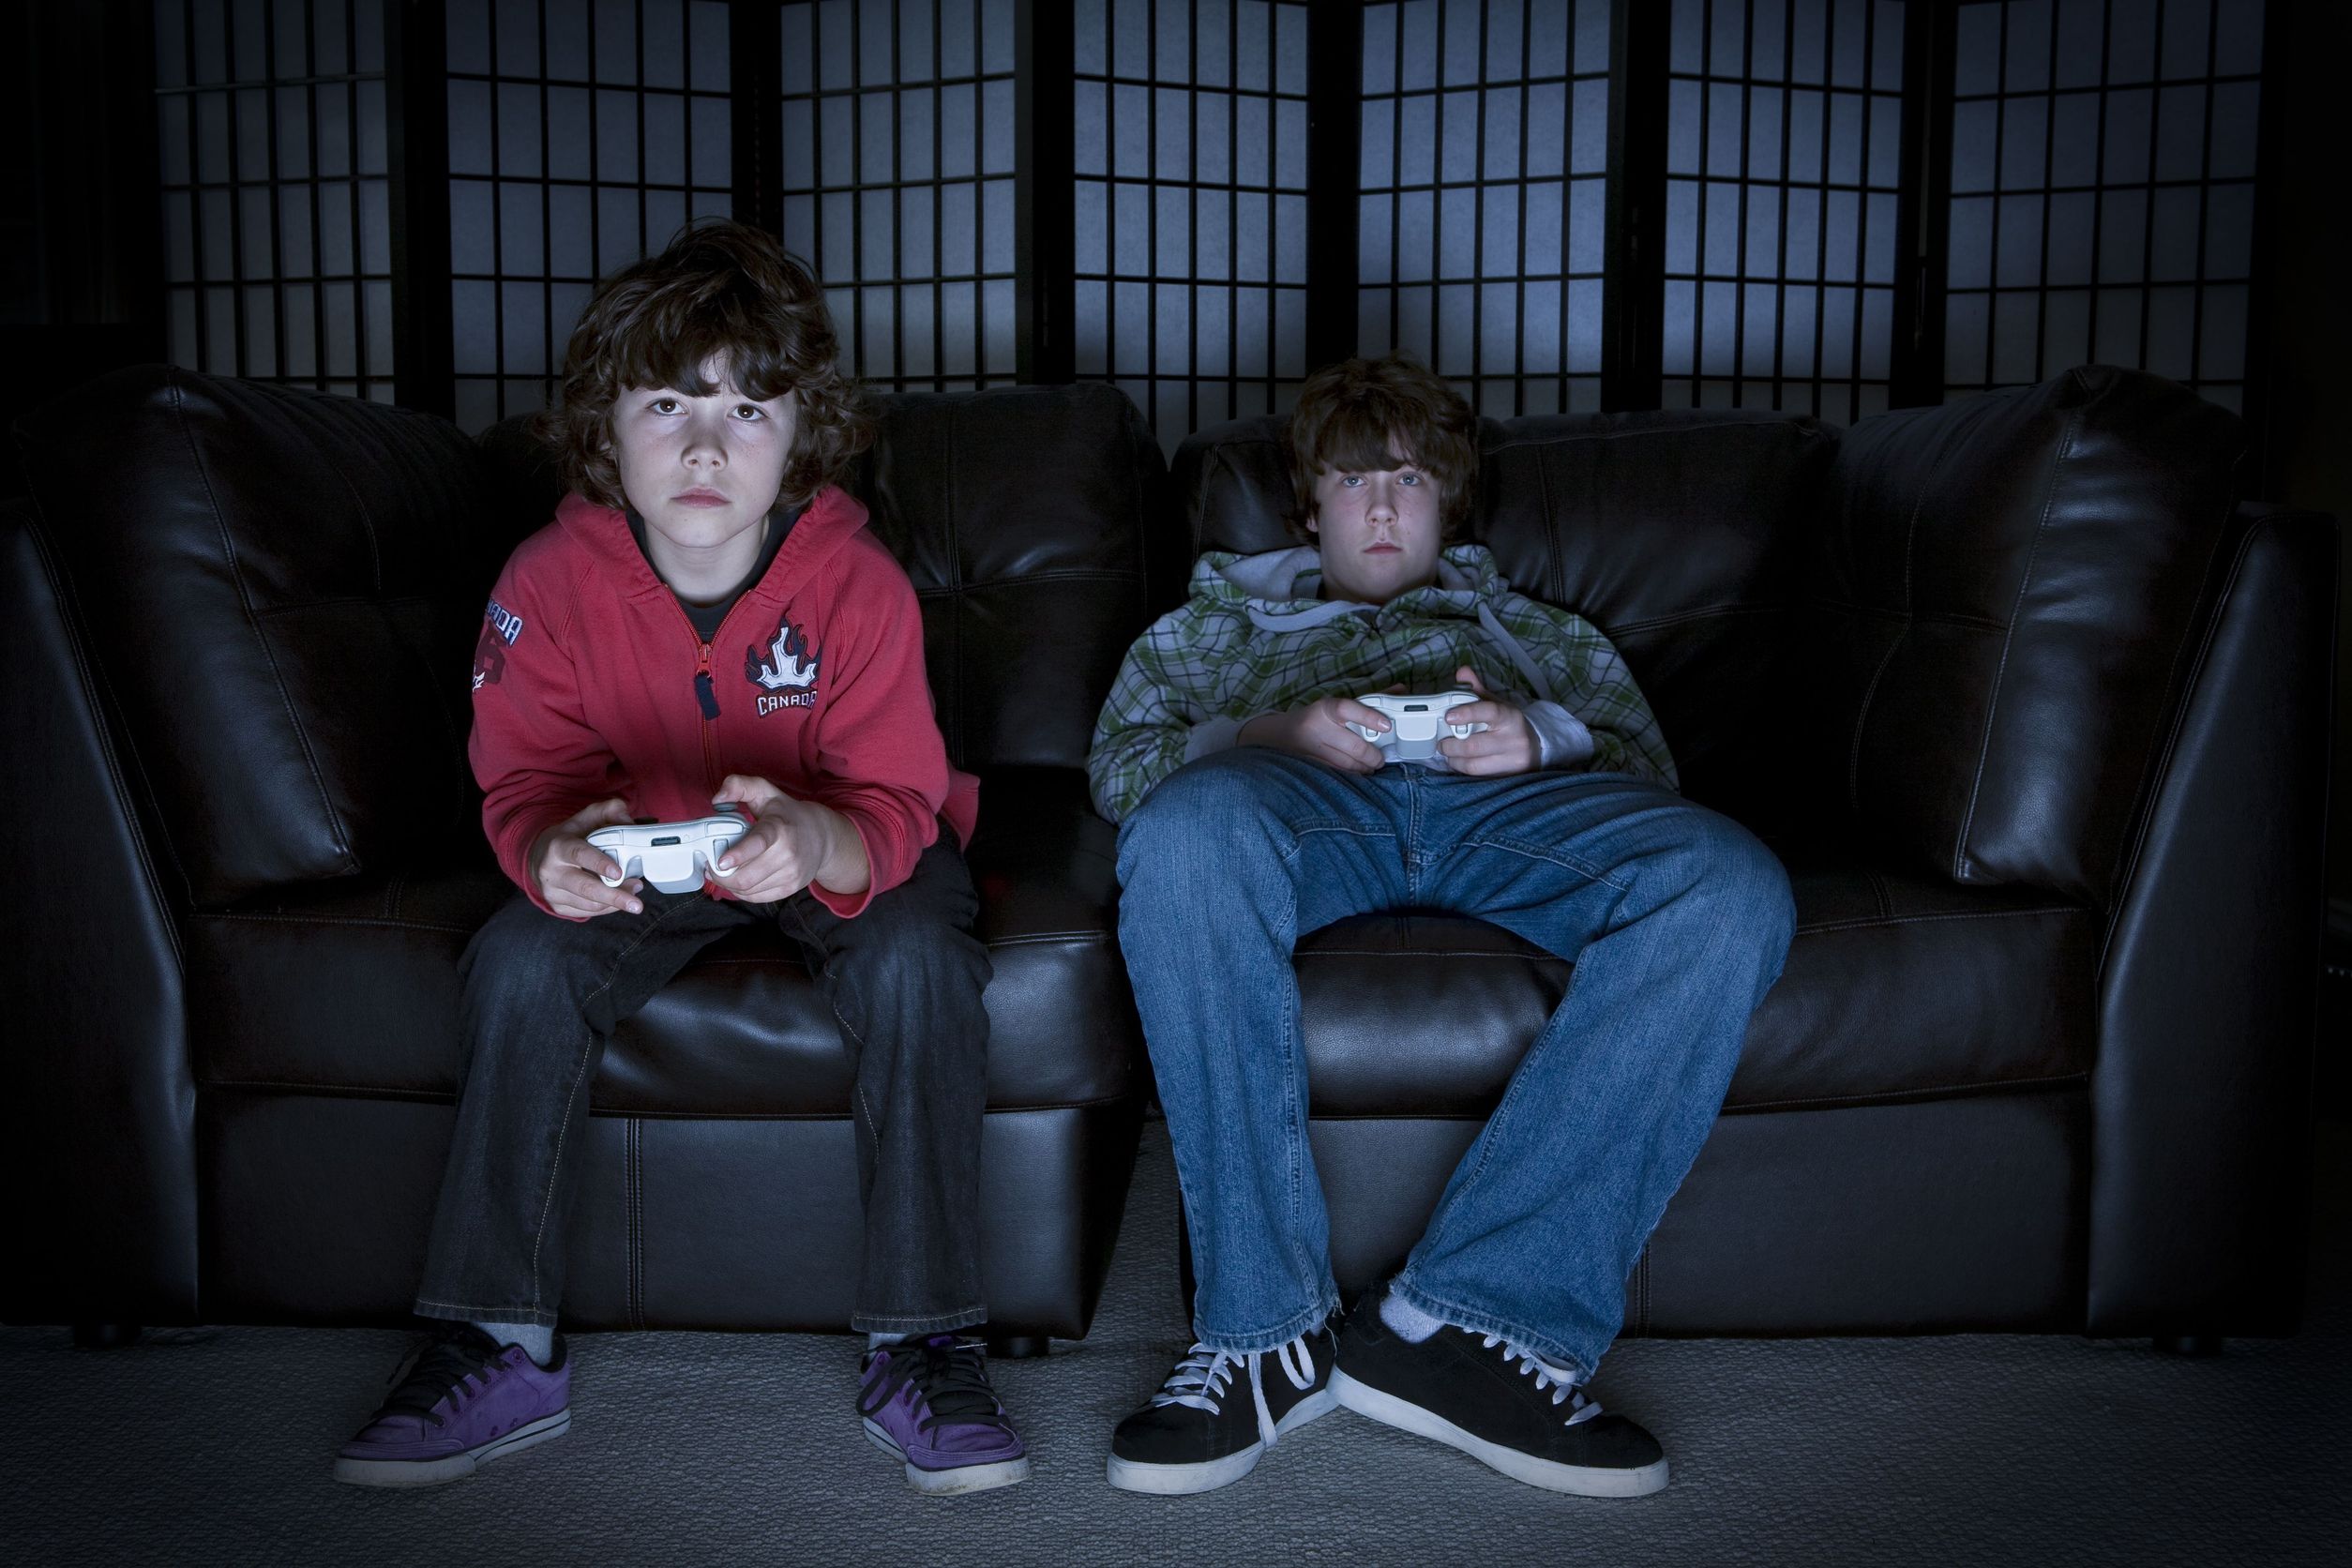 Psychological Effects of Video Games on Children